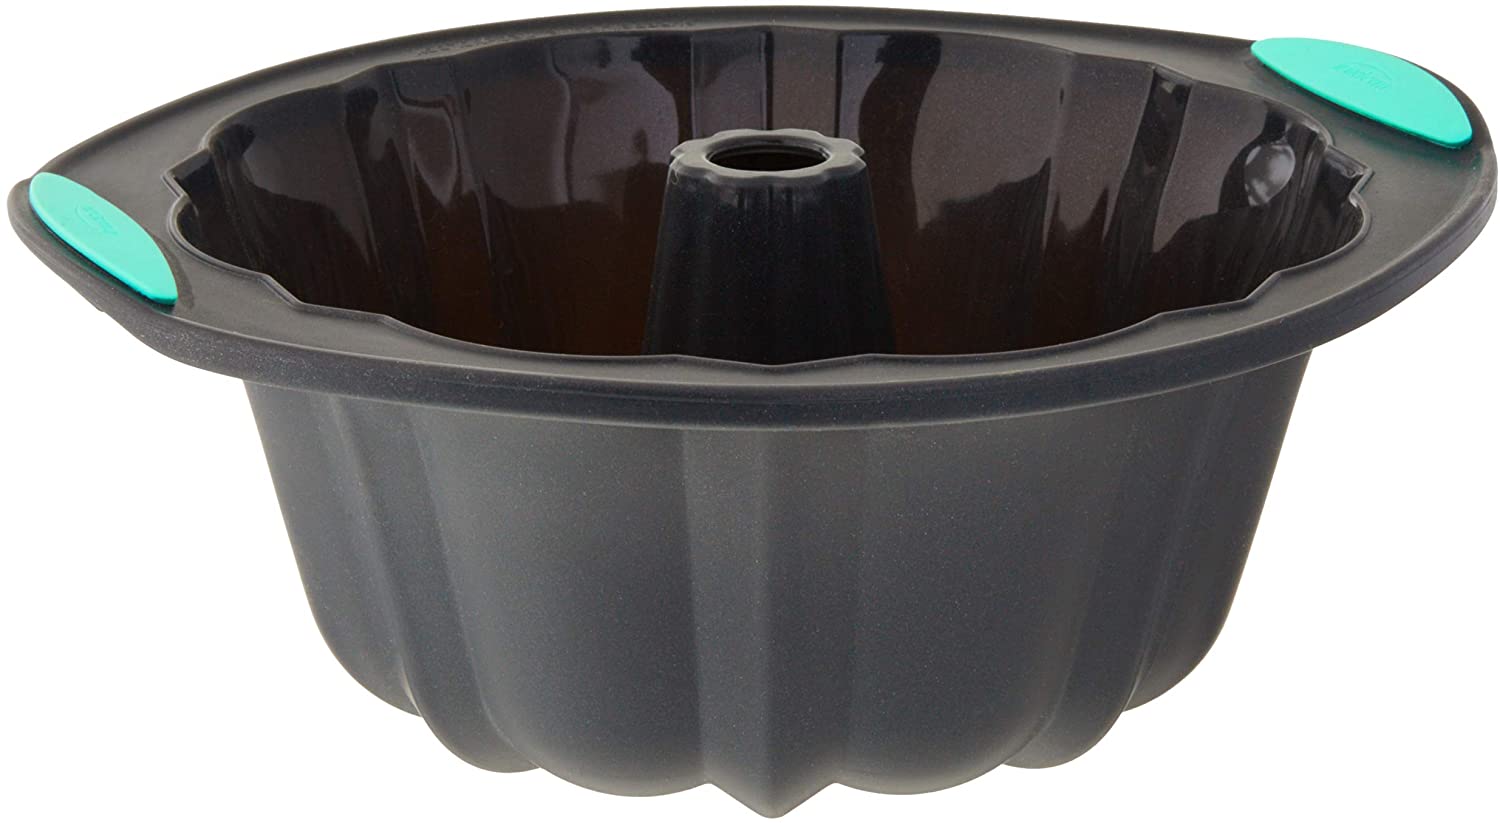 Trudeau Structured Silicone Fluted Bundt Pan - Grey with Mint Handles